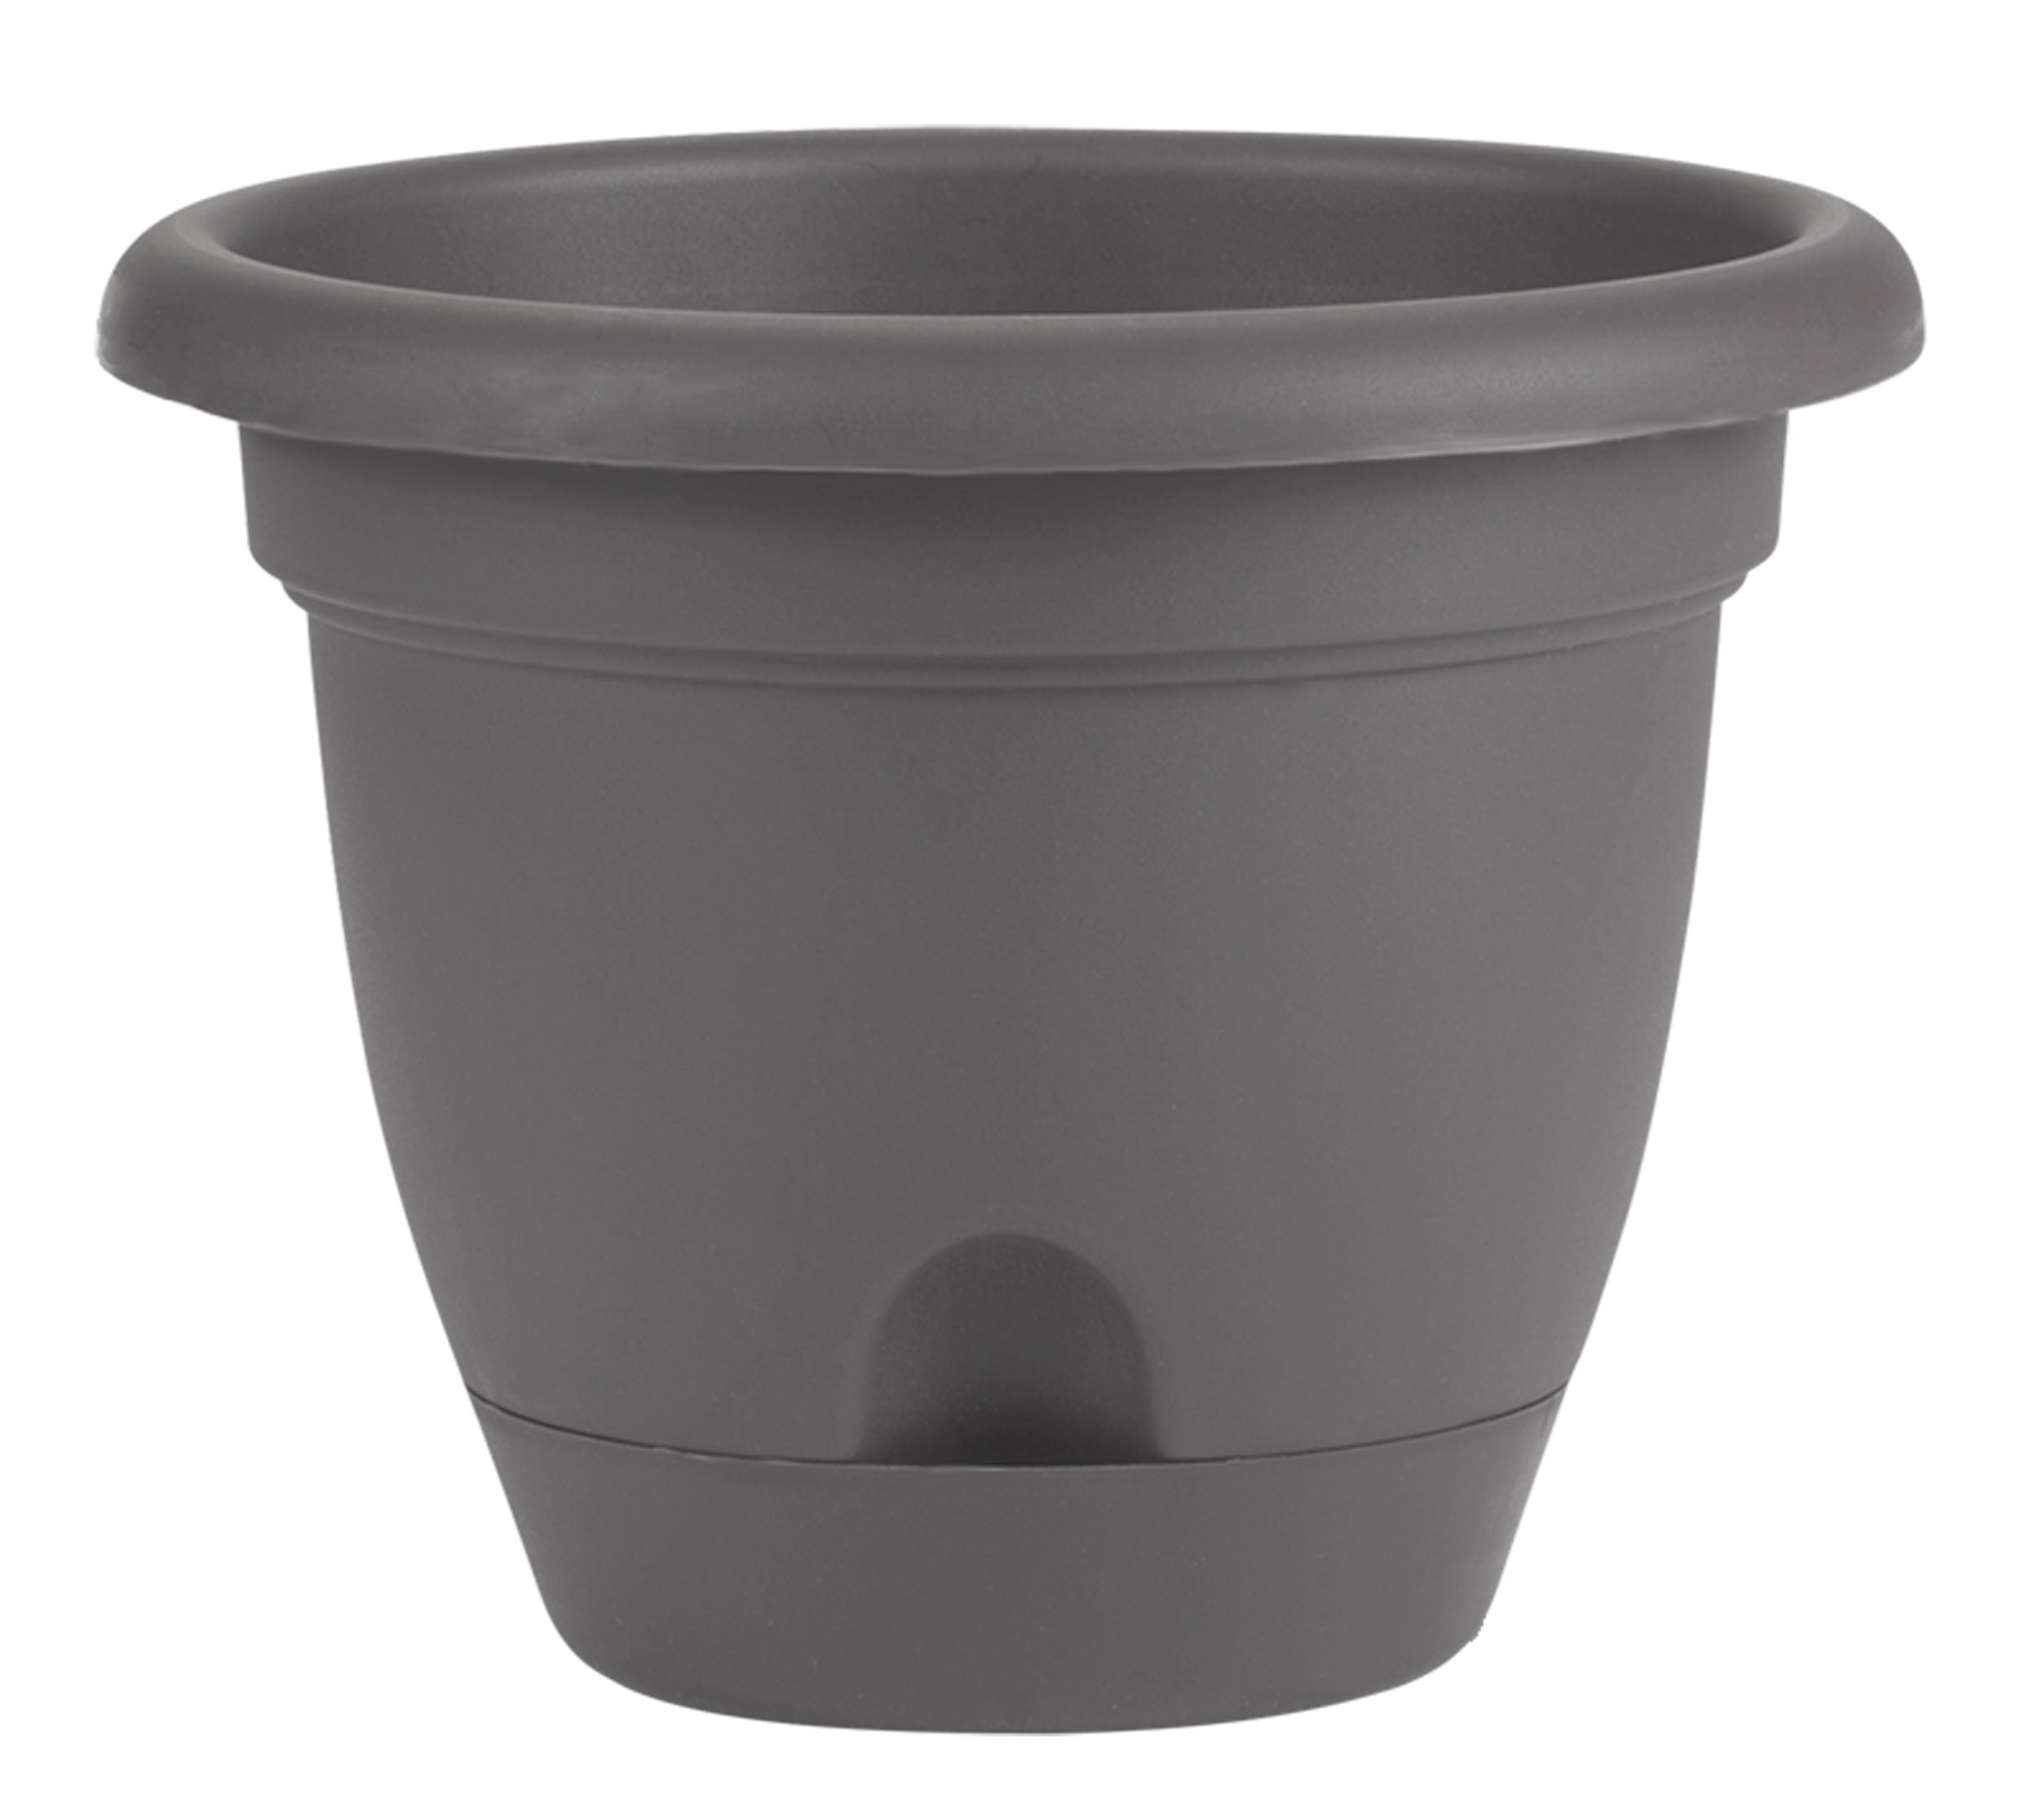 Saucer W/ Bloem 13.25 Round Plastic 10.75 Watering Planter Gray Lucca Charcoal x Self